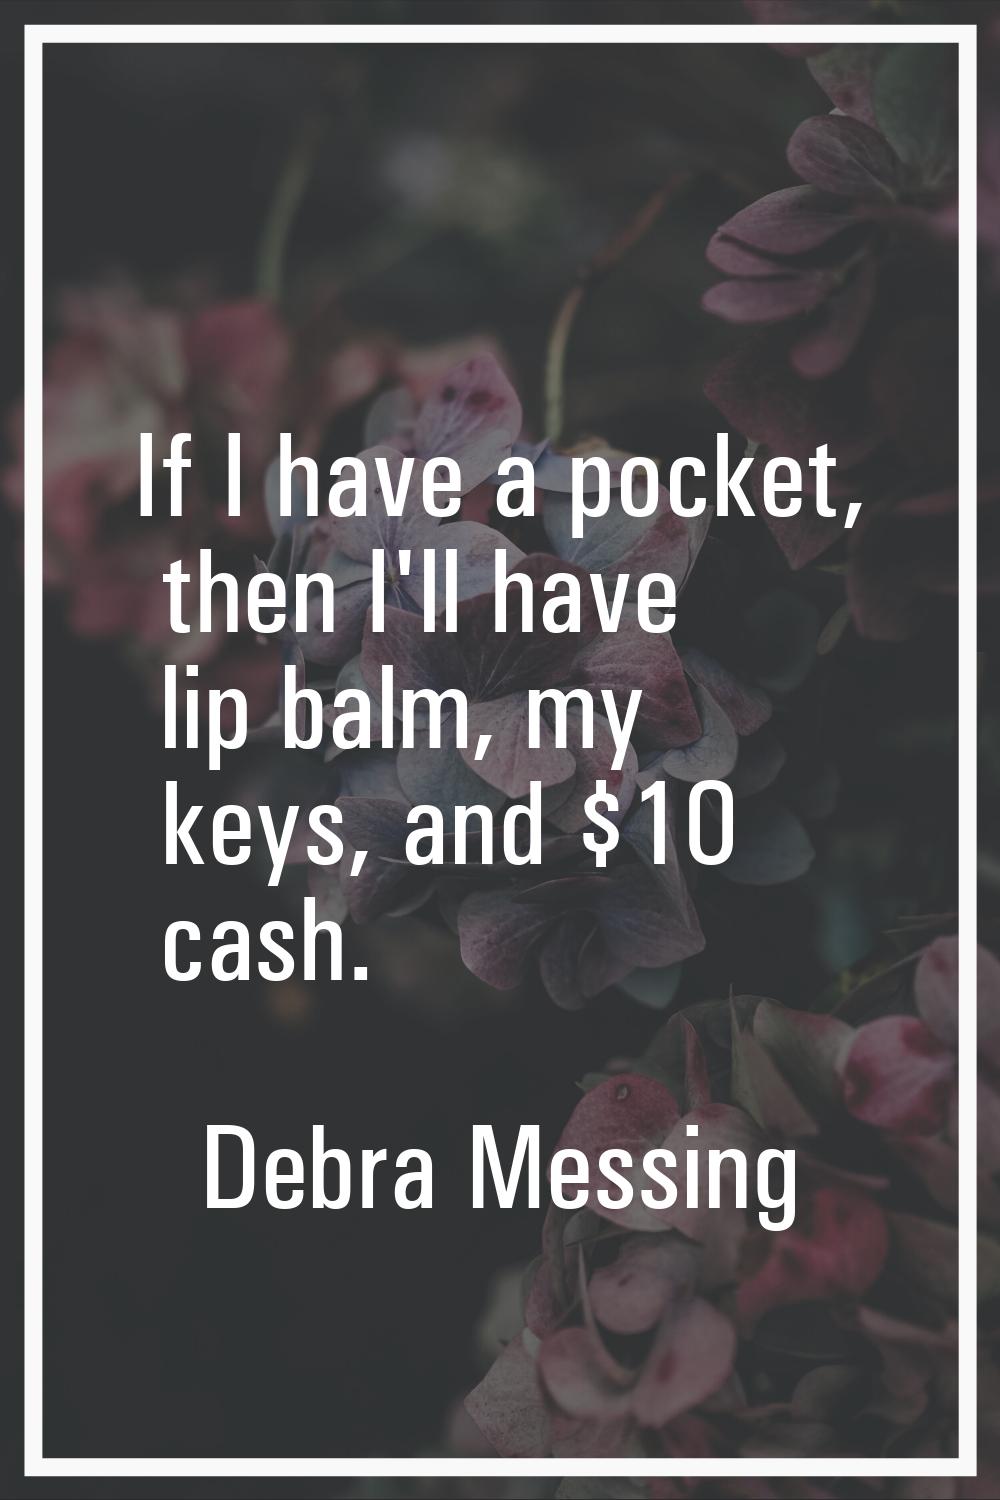 If I have a pocket, then I'll have lip balm, my keys, and $10 cash.